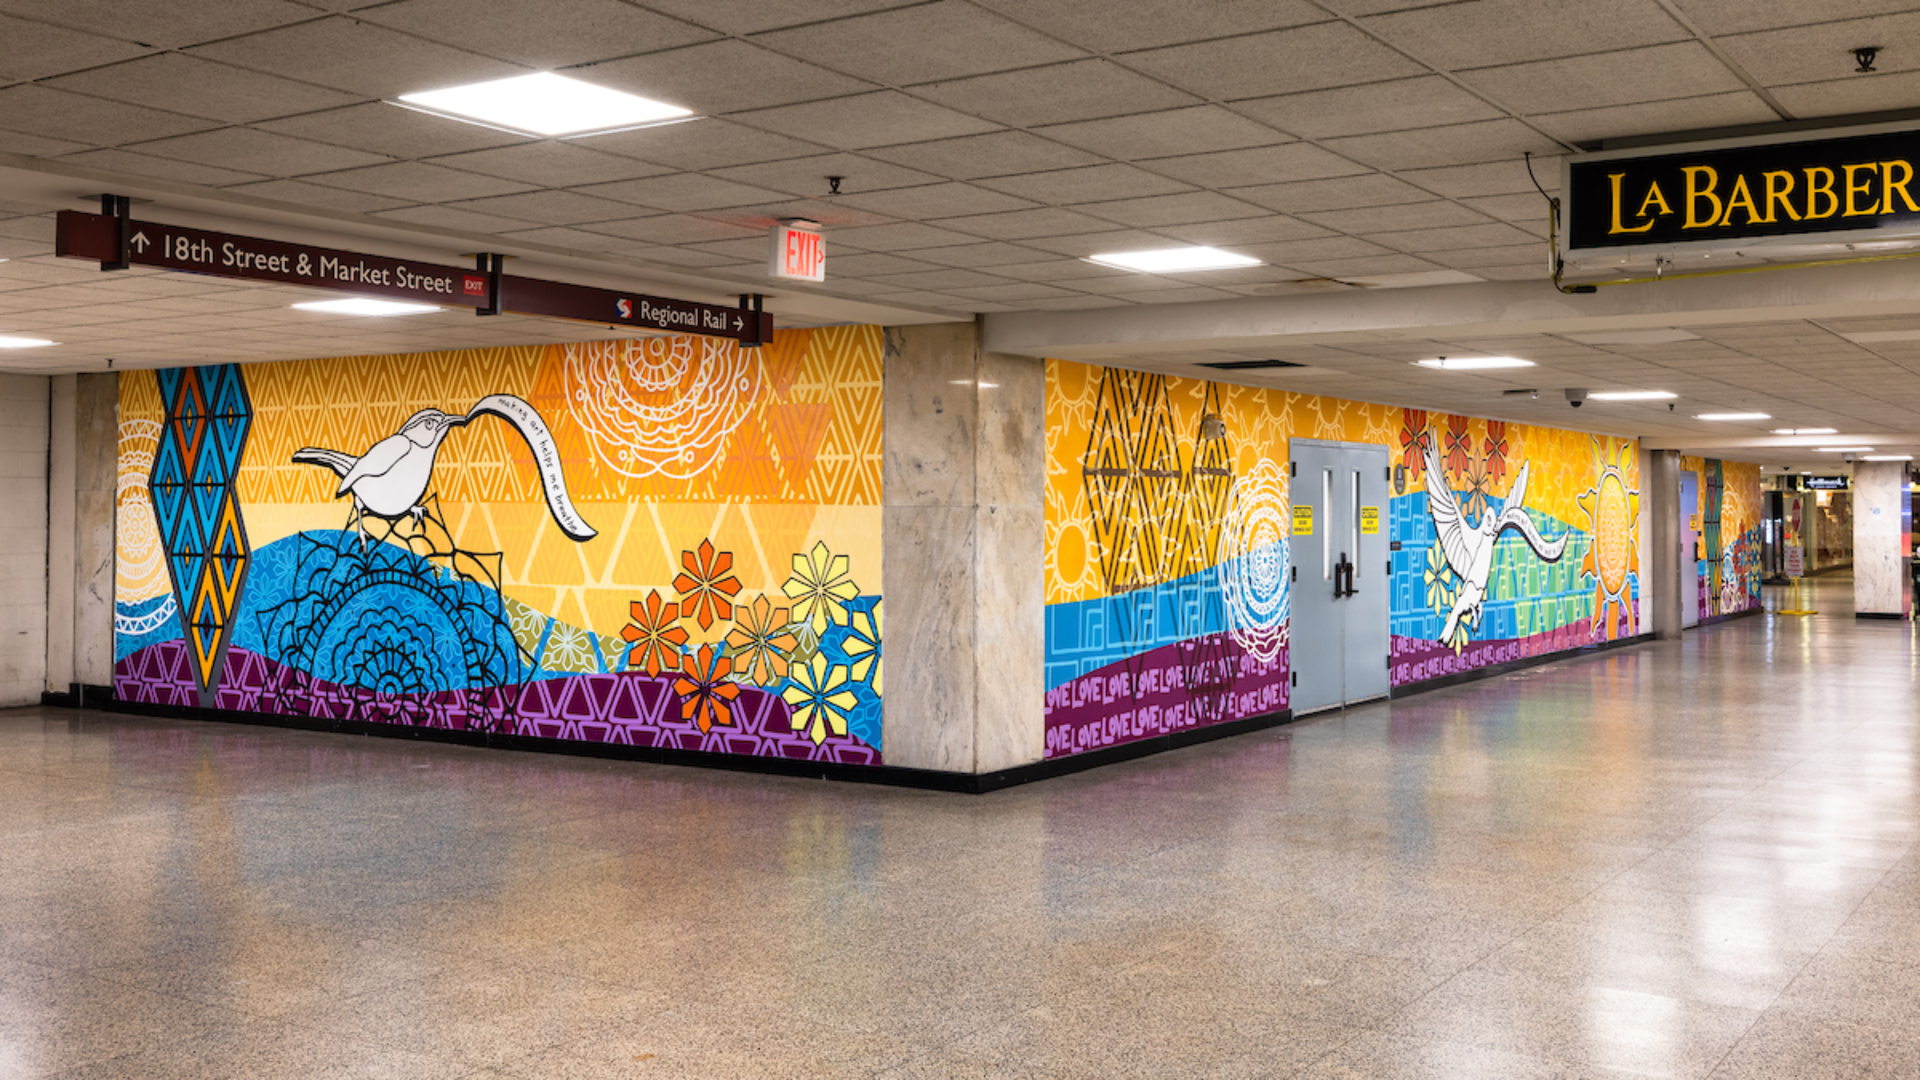 A bird holding a strip of paper that says "making art helps me breathe" is featured prominently in artist Lisa Kelley's new mural inside Philadelphia's Suburban Station.